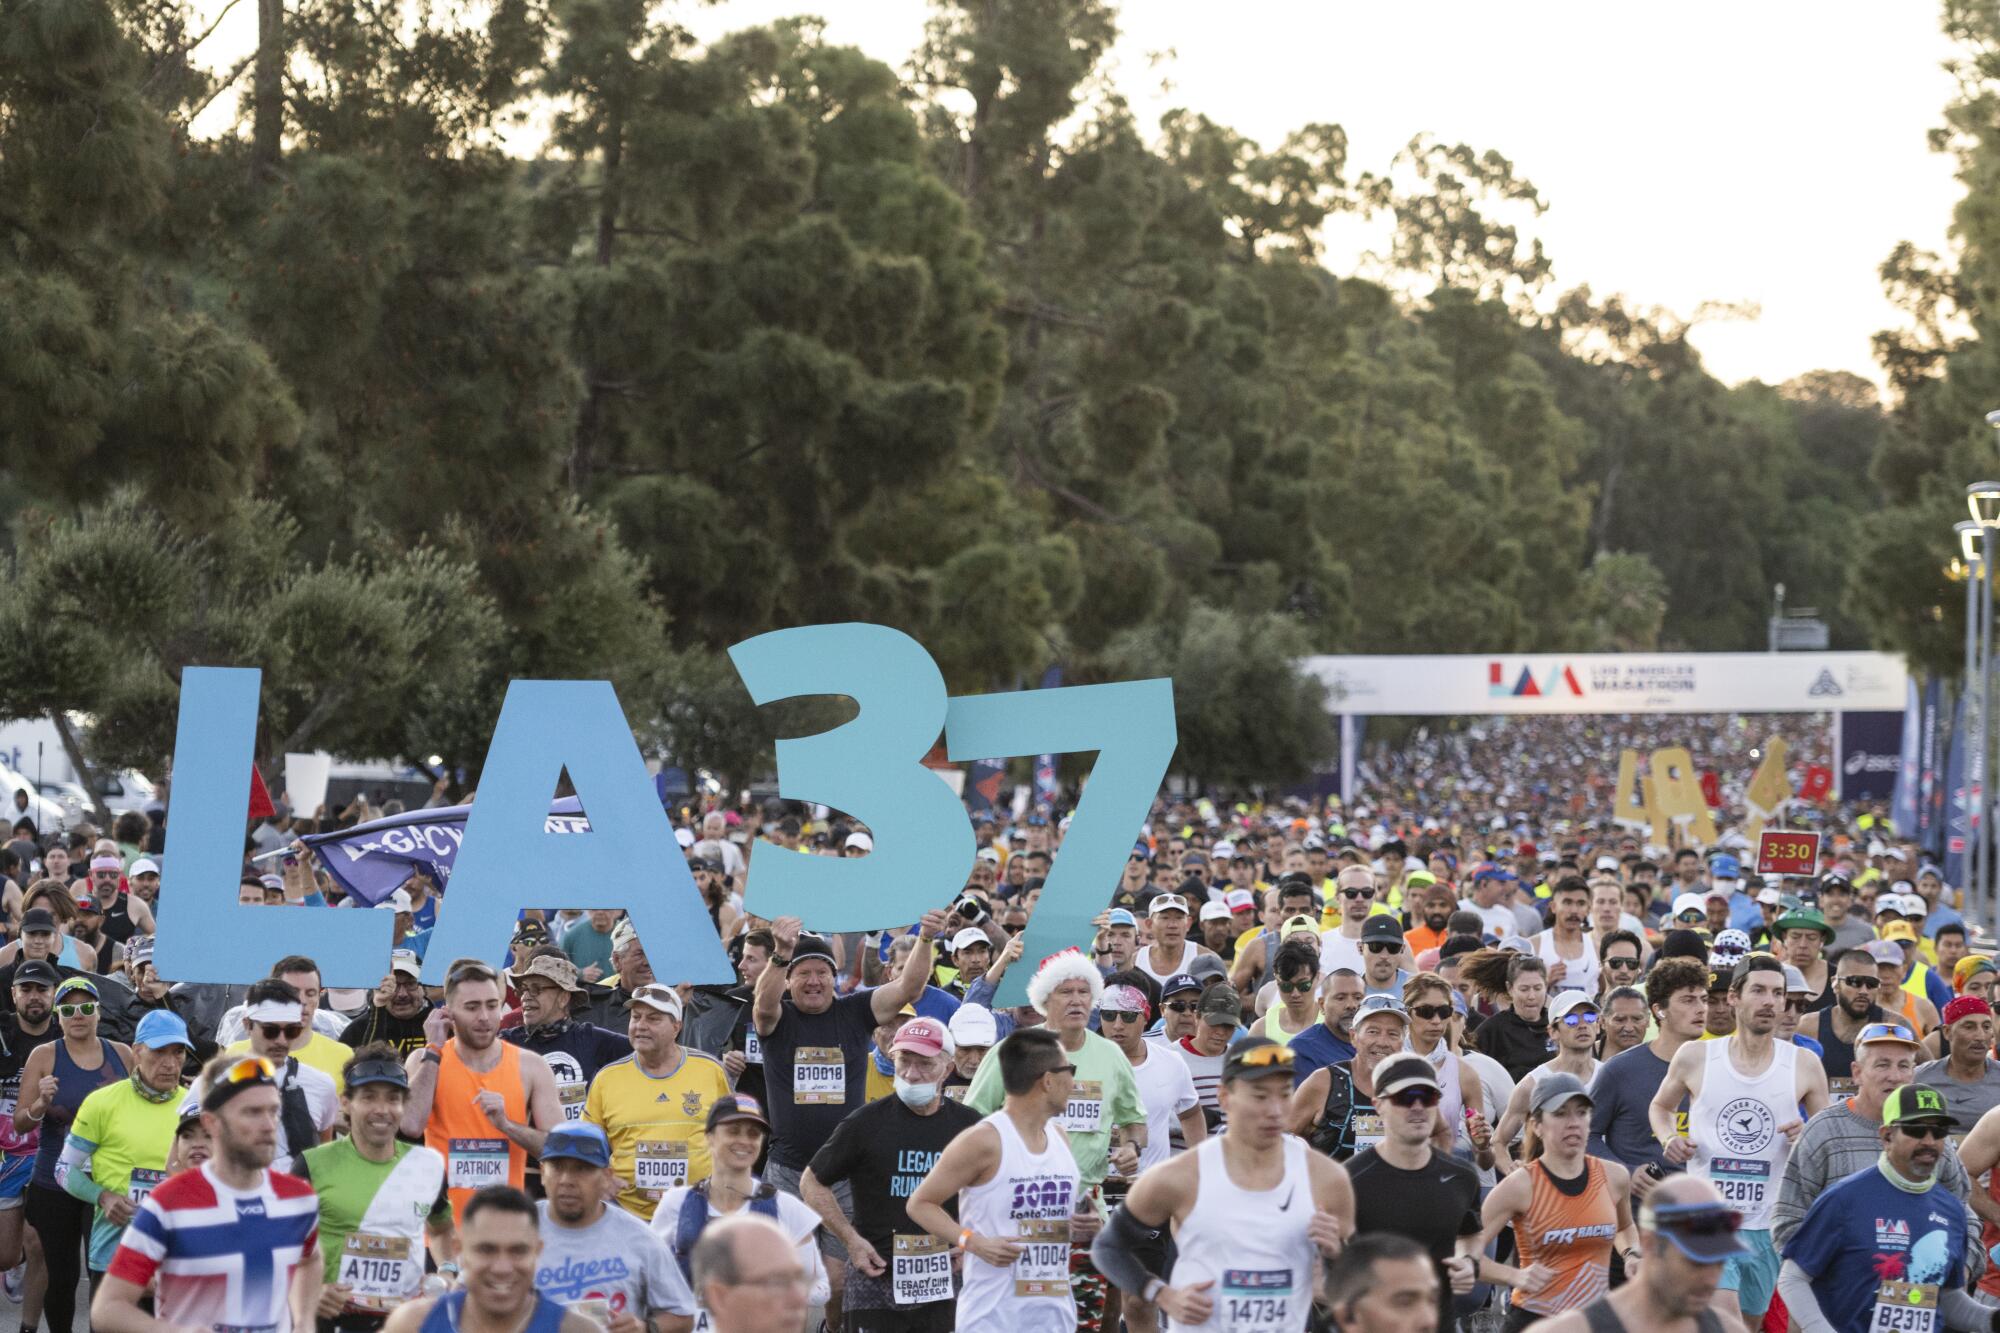 Signs reading "LA 37" are held above a crowd of runners